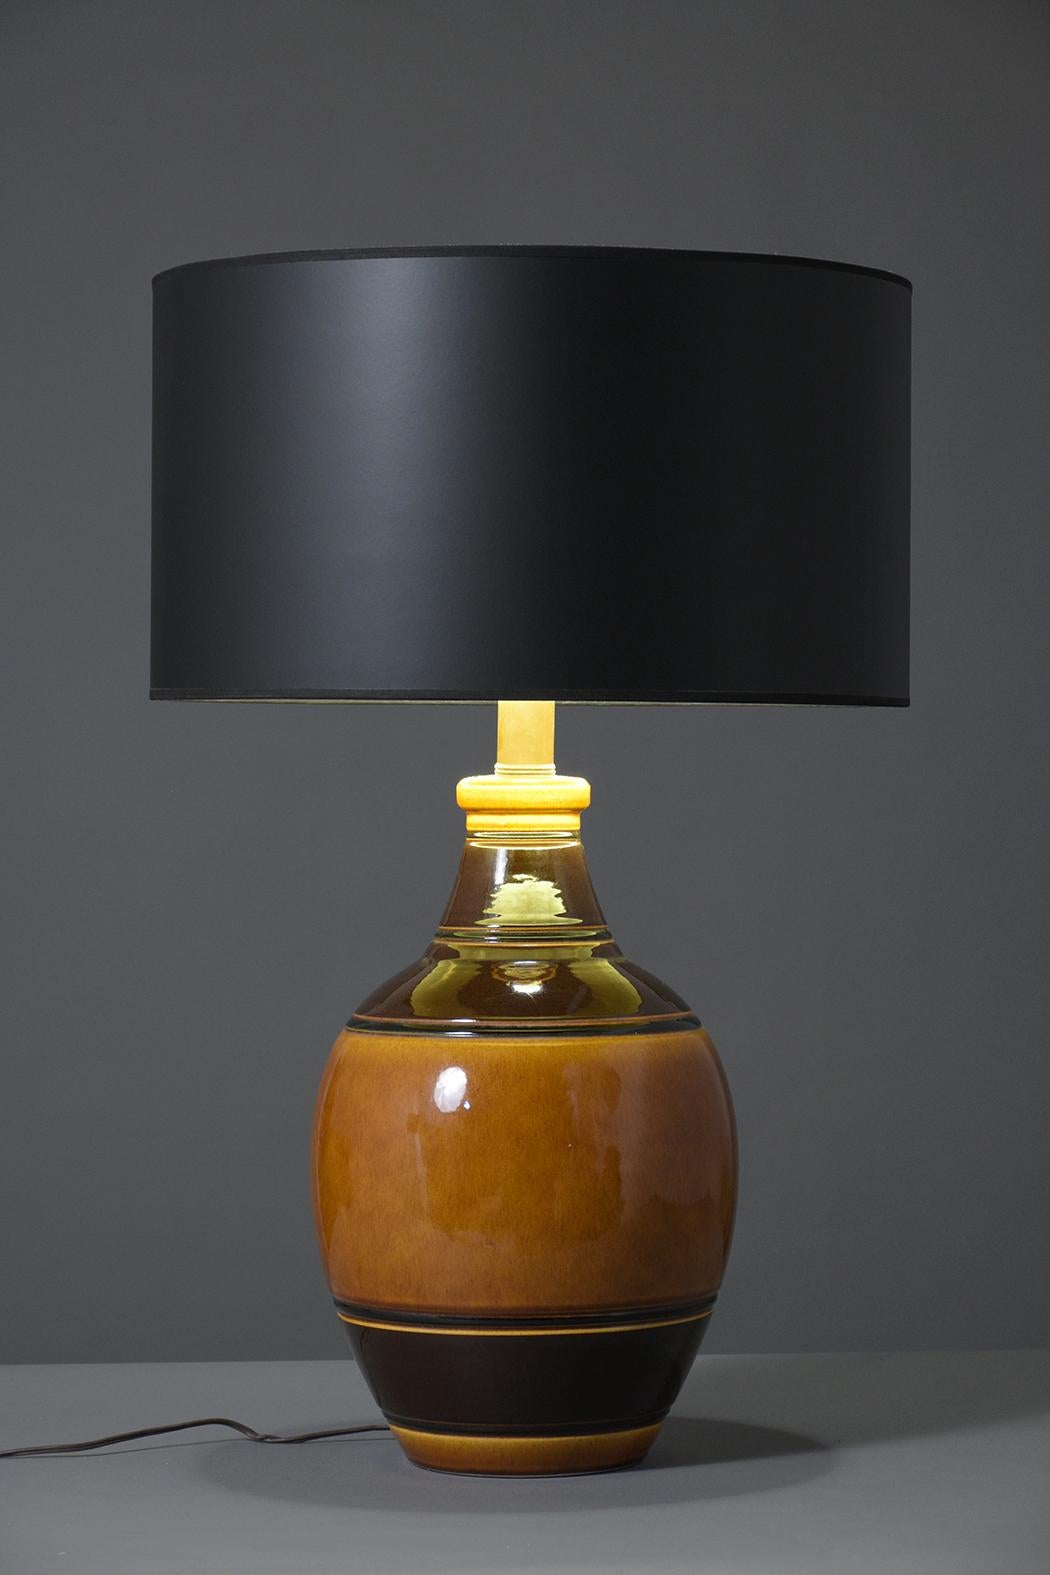 A vintage pair of 1960's table lamps that are hand-crafted out of caramel & brown color ceramic and are in working condition. These fabulous lamps have been professionally restored, feature new black shades, and the ceramic bases have a beautiful